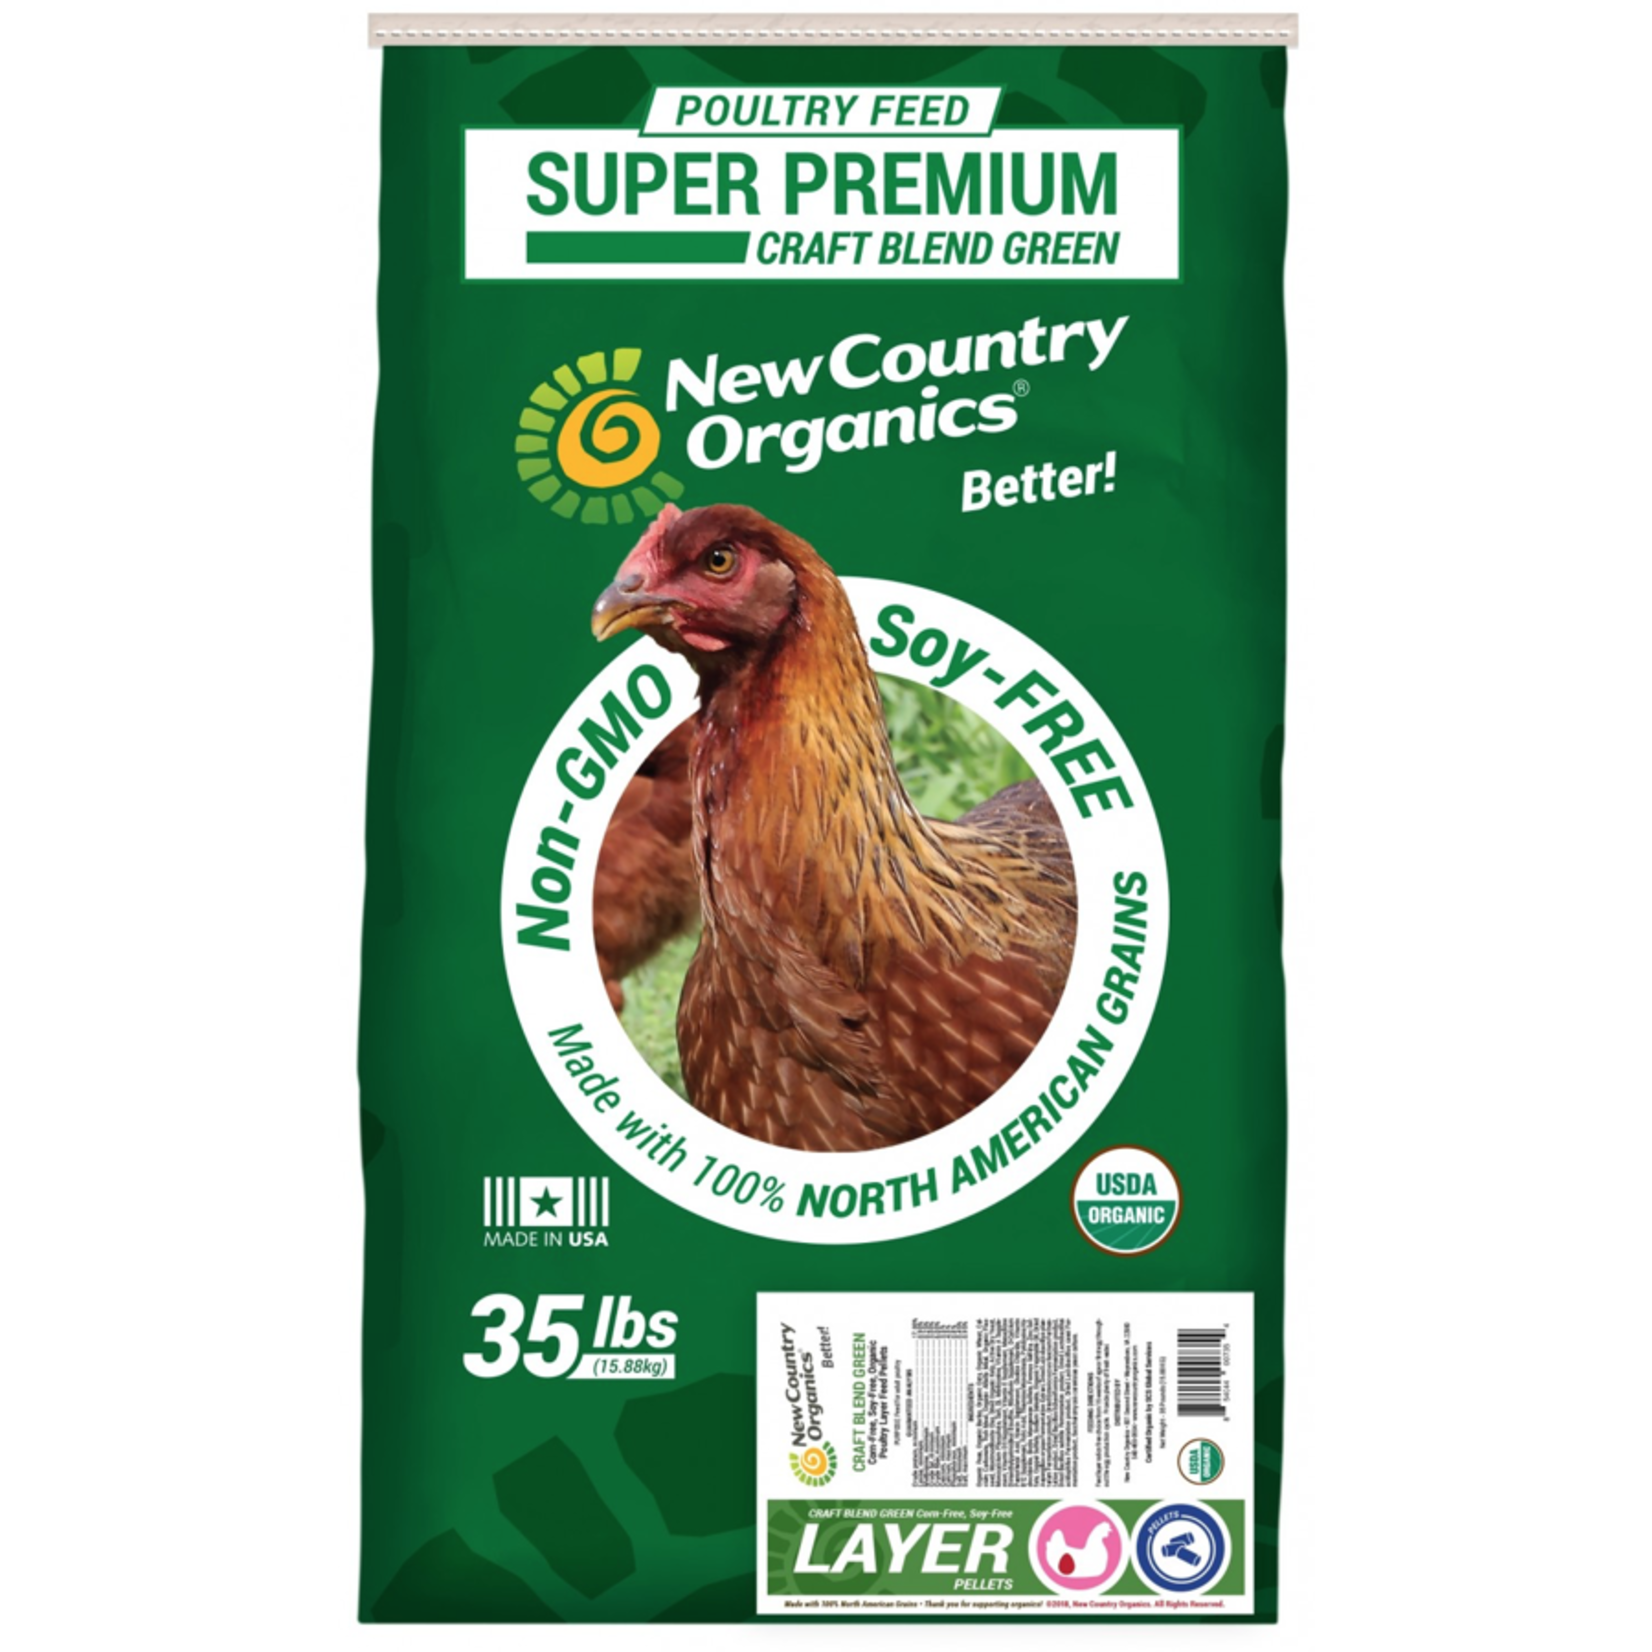 New Country Organics New Country Organic Soy-Free Chicken Feed Layer Pellet 35lb